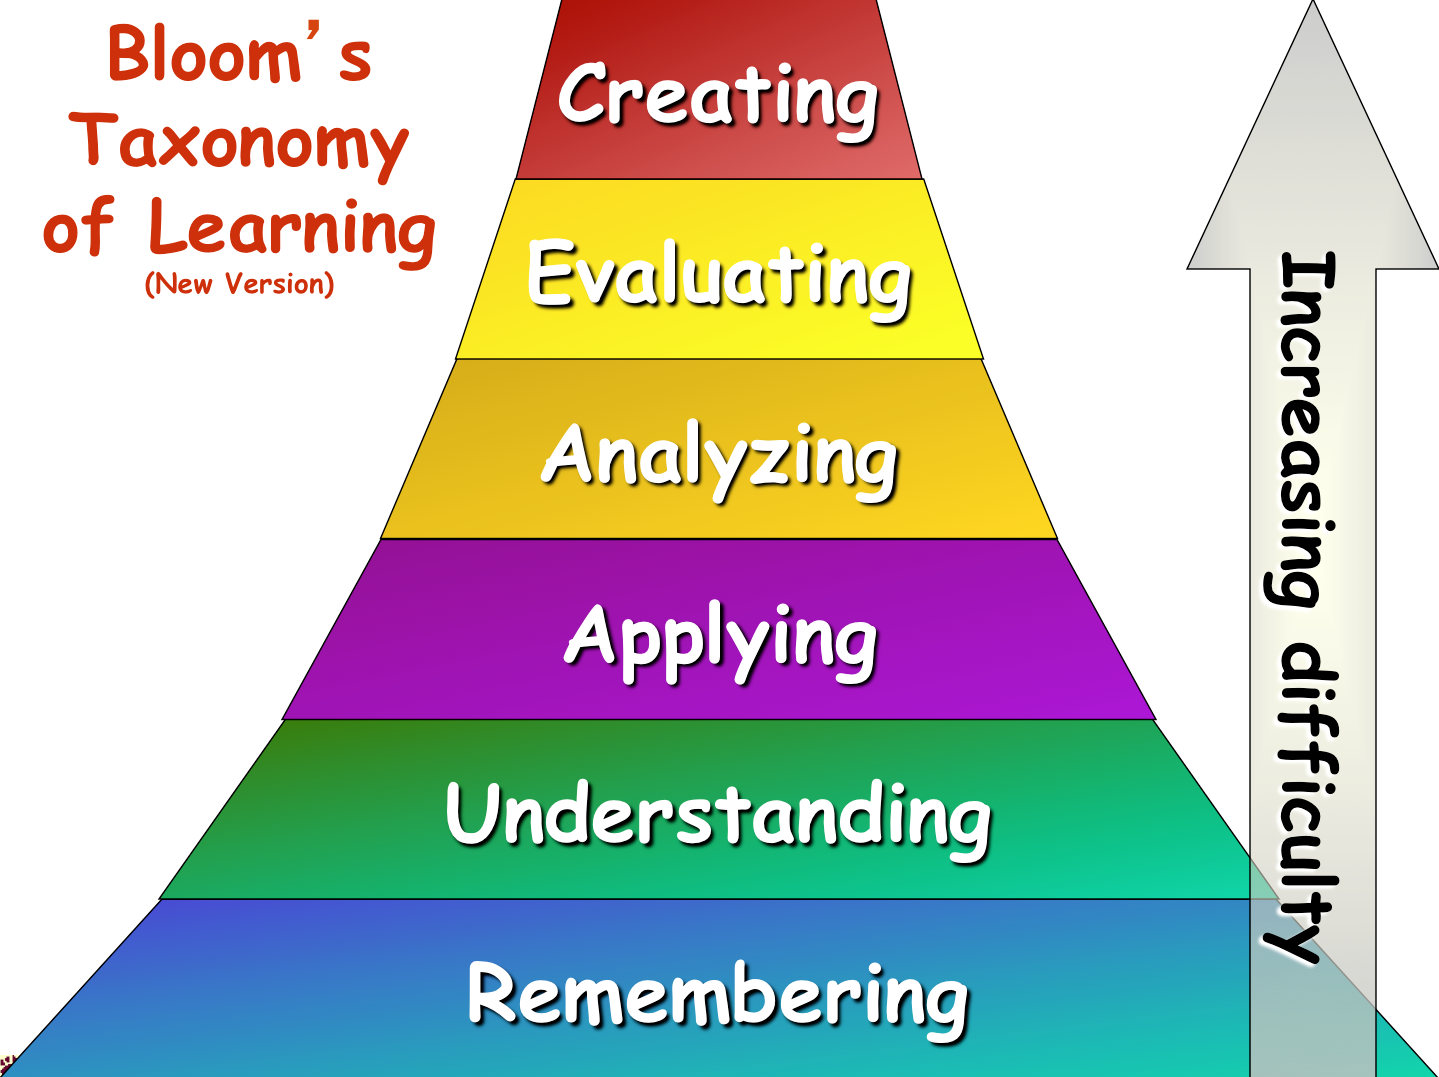 sandra-sims-innovations-technology-learning-objectives-and-change-theories